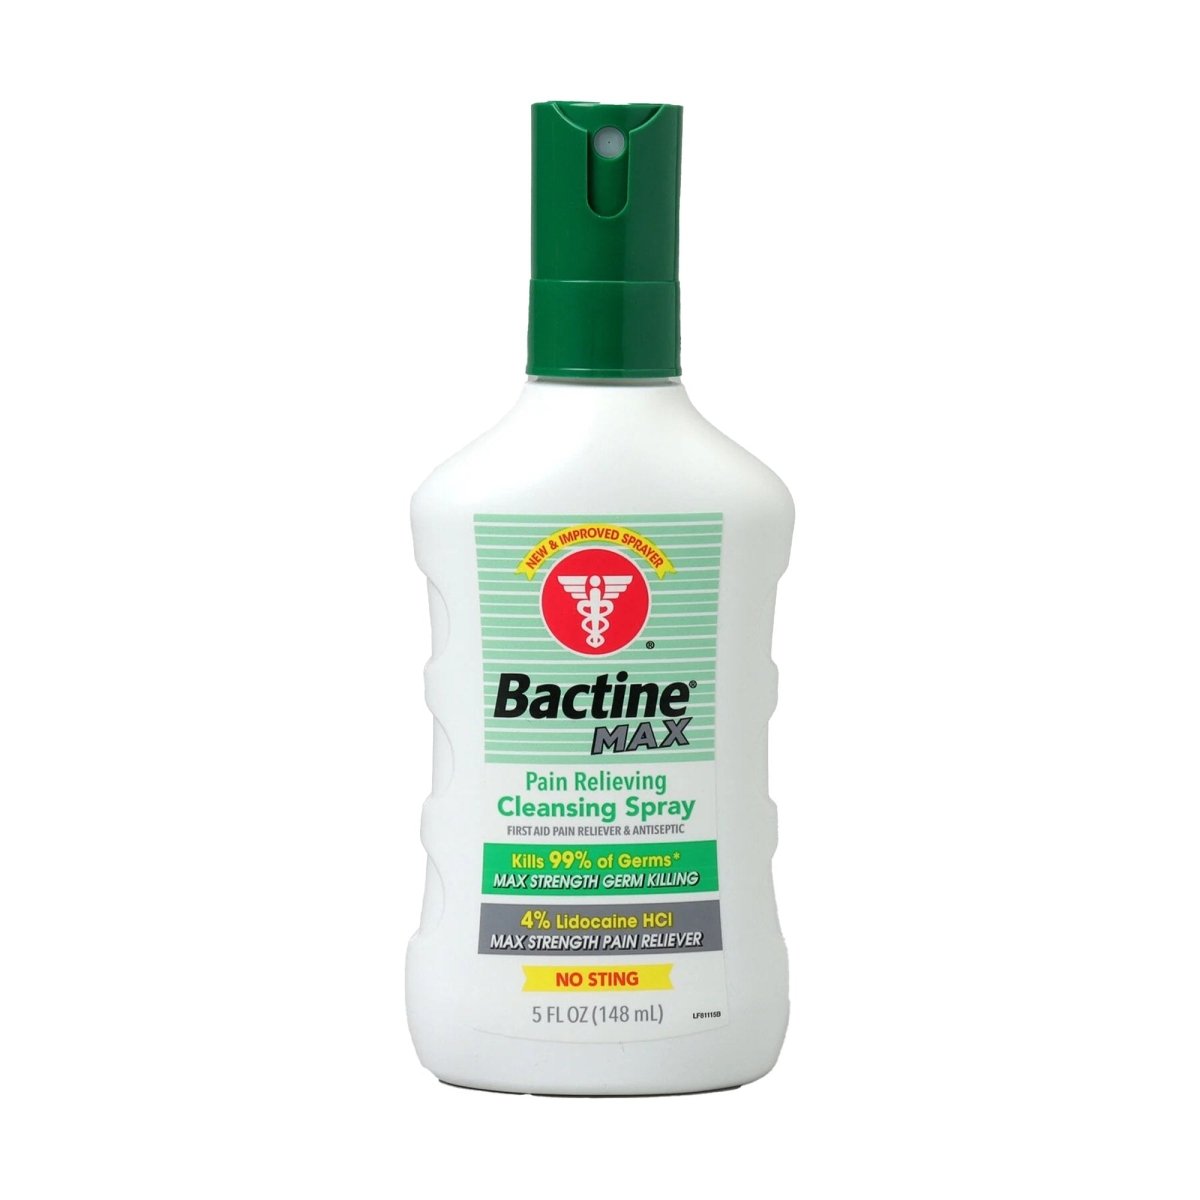 Bactine Max Pain Relieving Cleansing Spray - 1206938_EA - 1